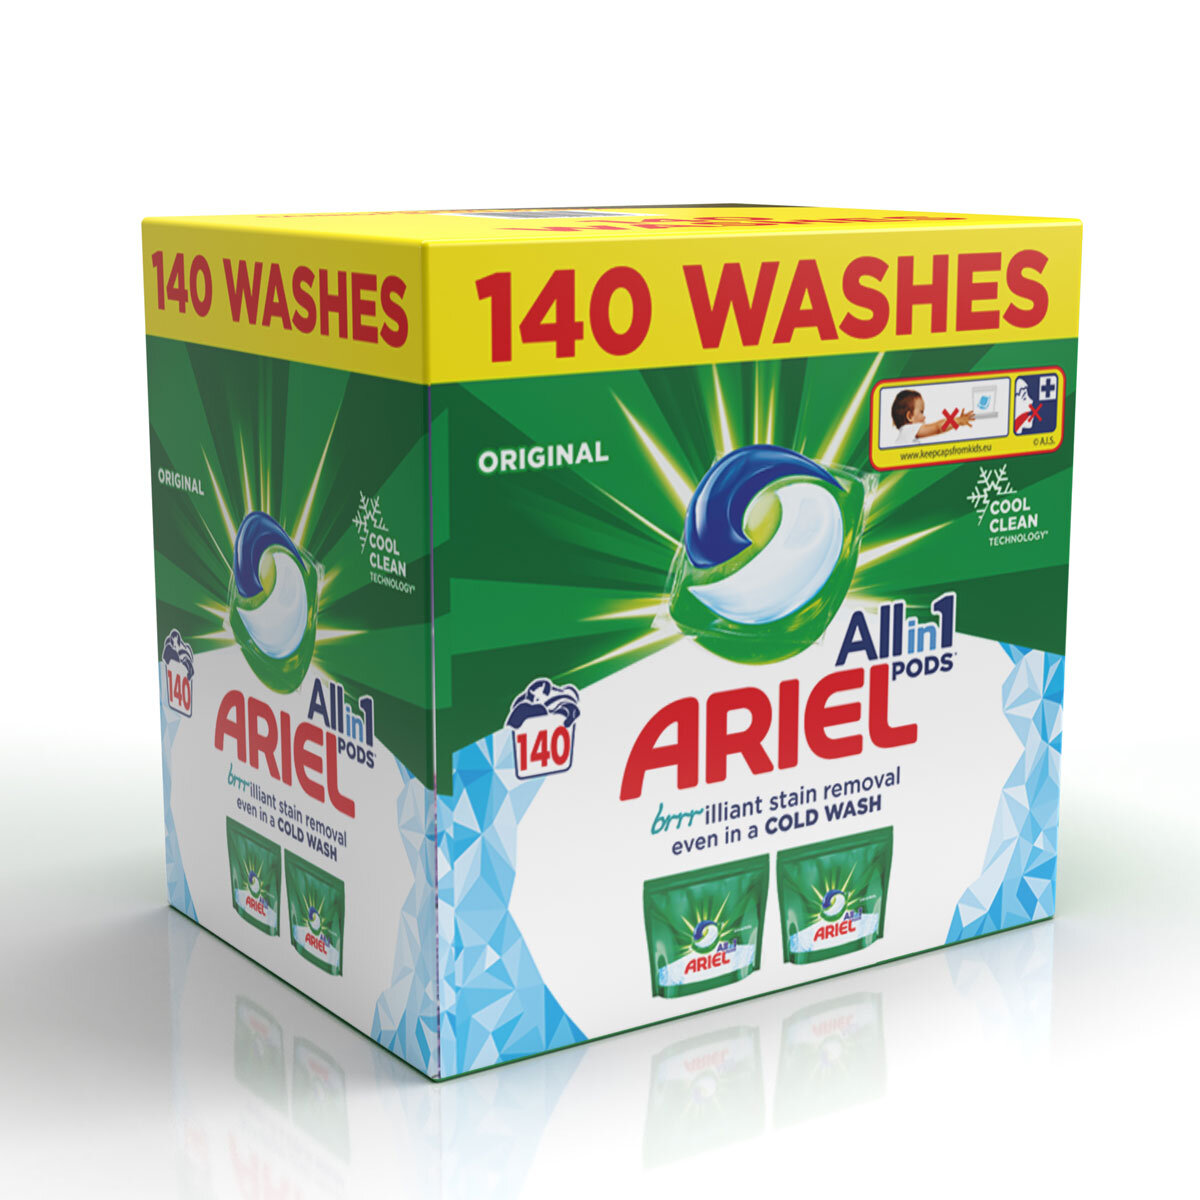 Ariel All in One Pods, 140 Wash | Costco UK